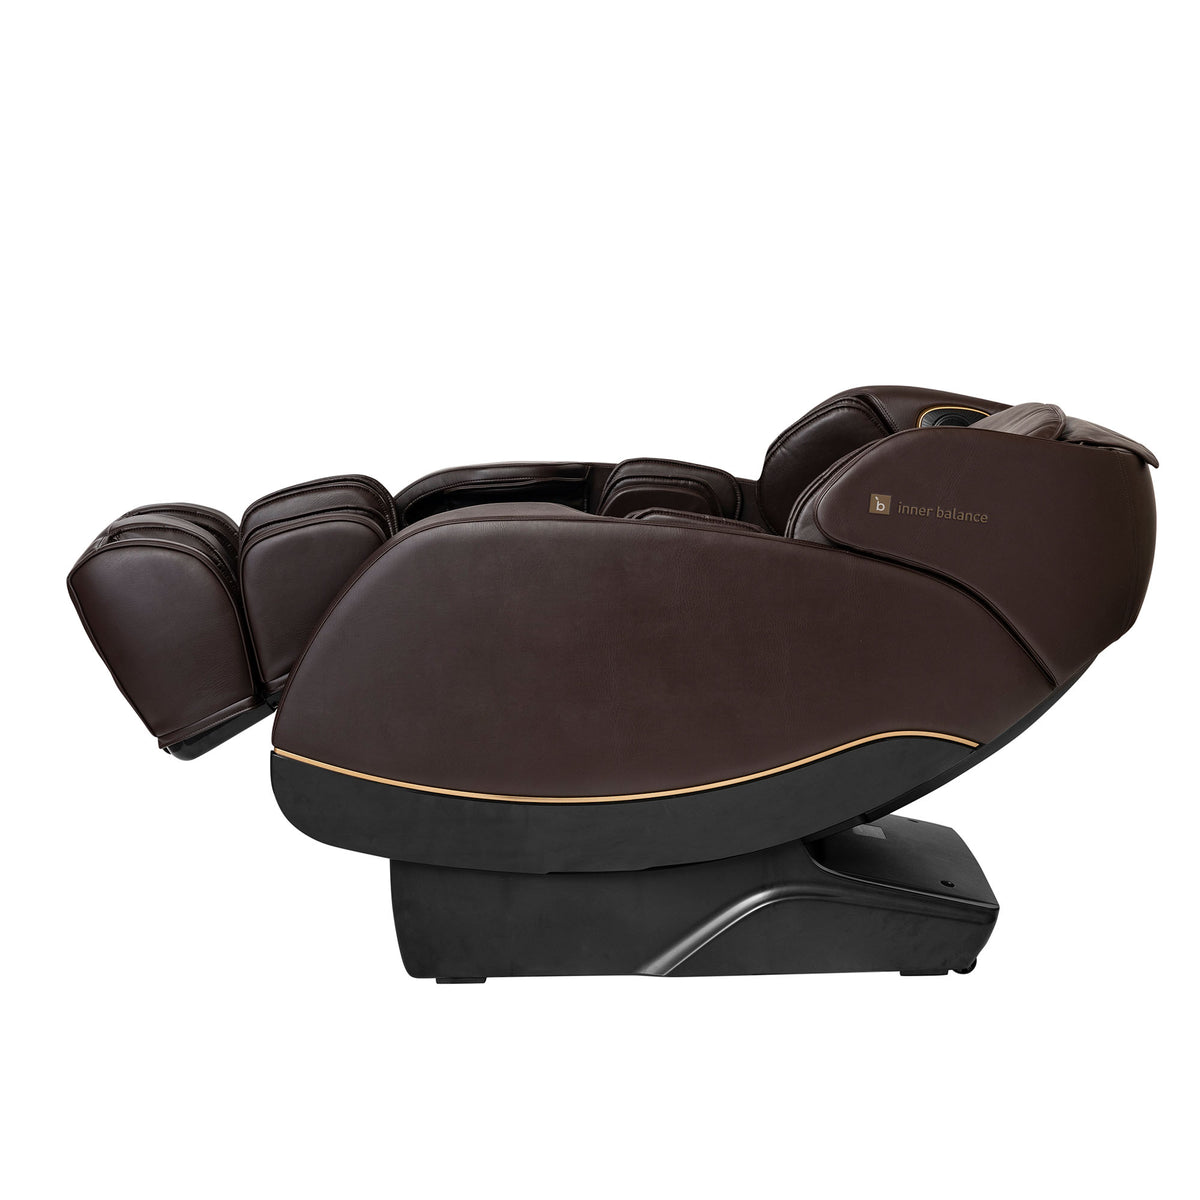 Side view of an almost fully reclined Inner Balance Wellness Jin 2.0 Massage Chair in brown leather